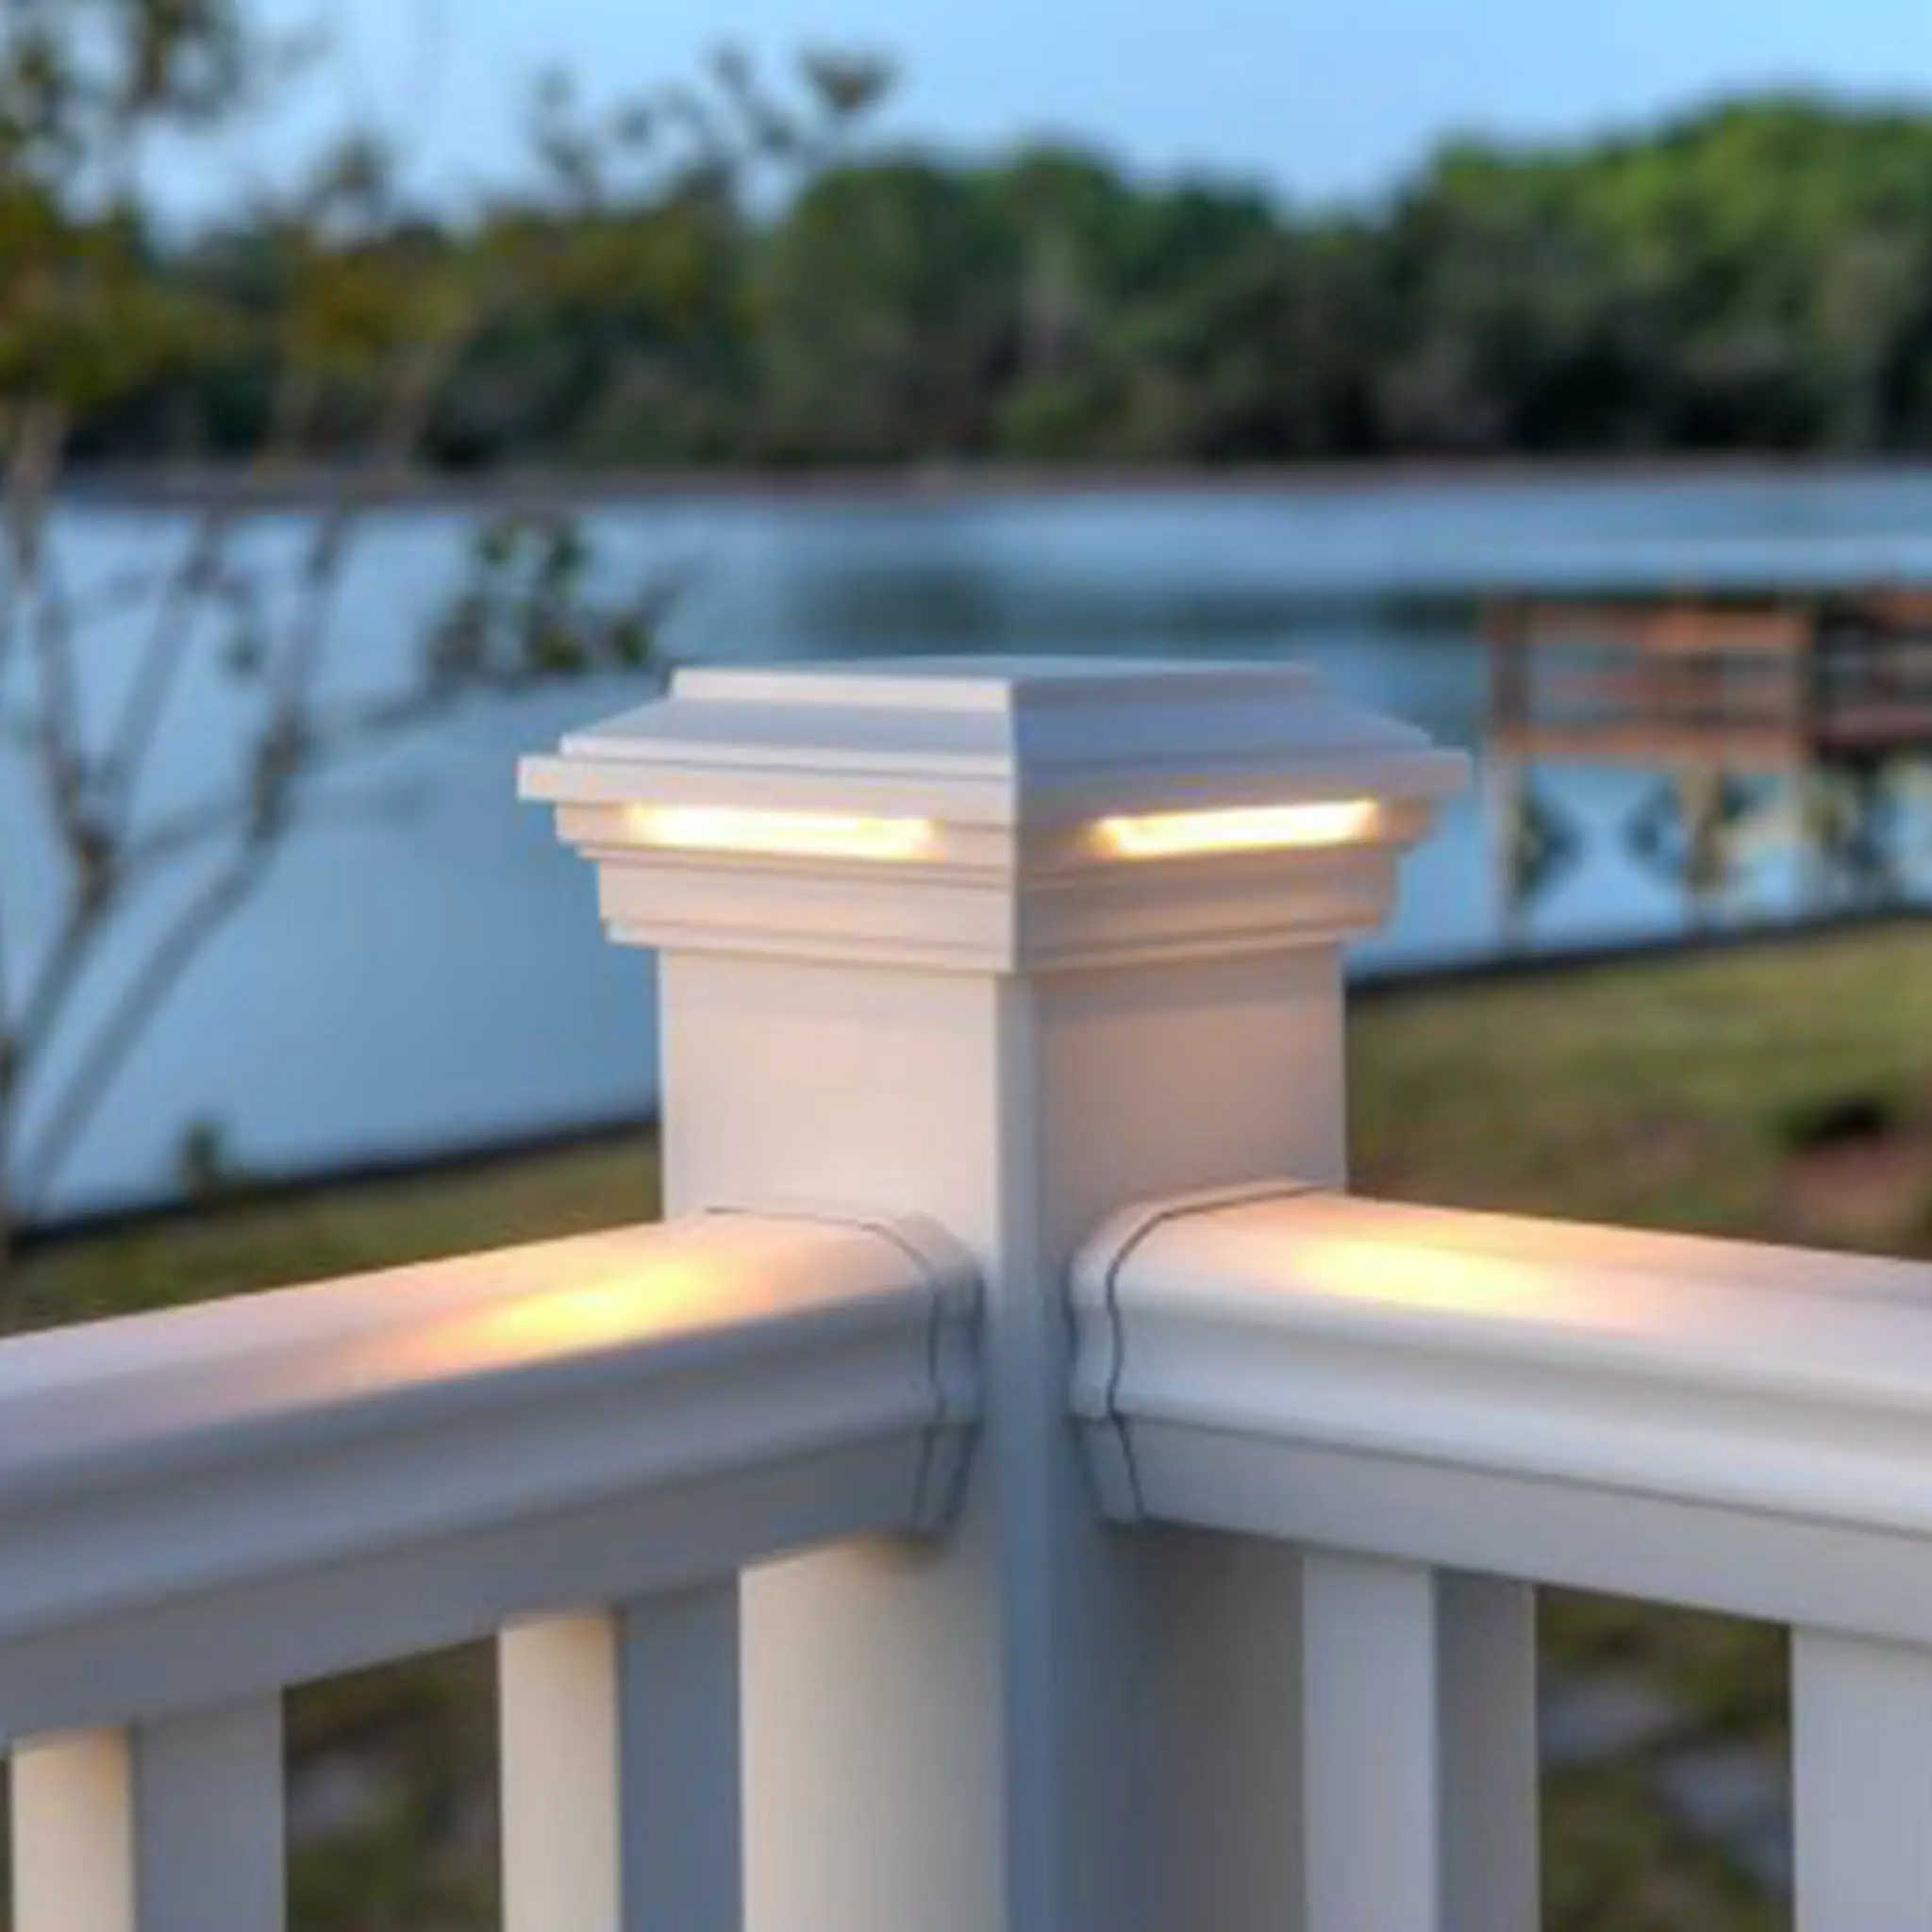 Illuminate Your Deck with Trex: Stunning Results